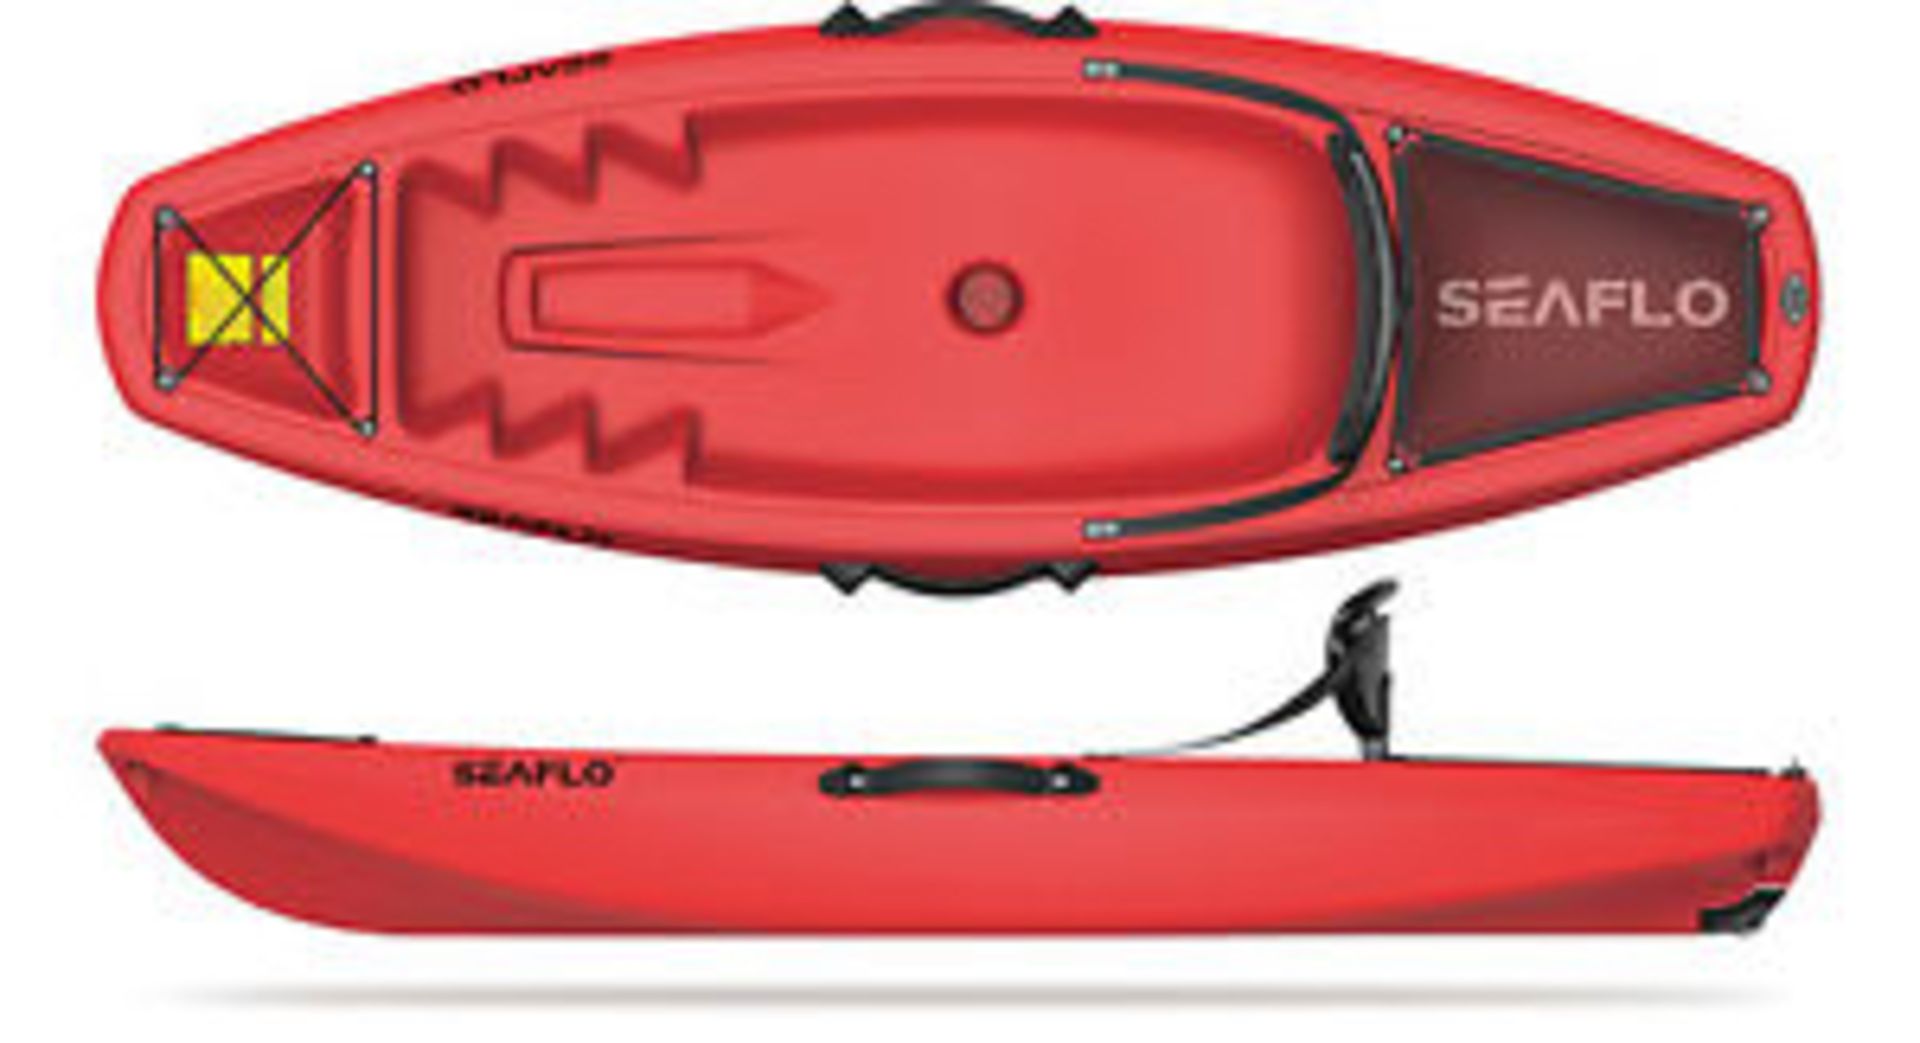 DELUXE CHILD SIT ON KAYAK - QTY: 1 Size: 185cm x 62cm x 23cm supplied with back rest, bungee cord,